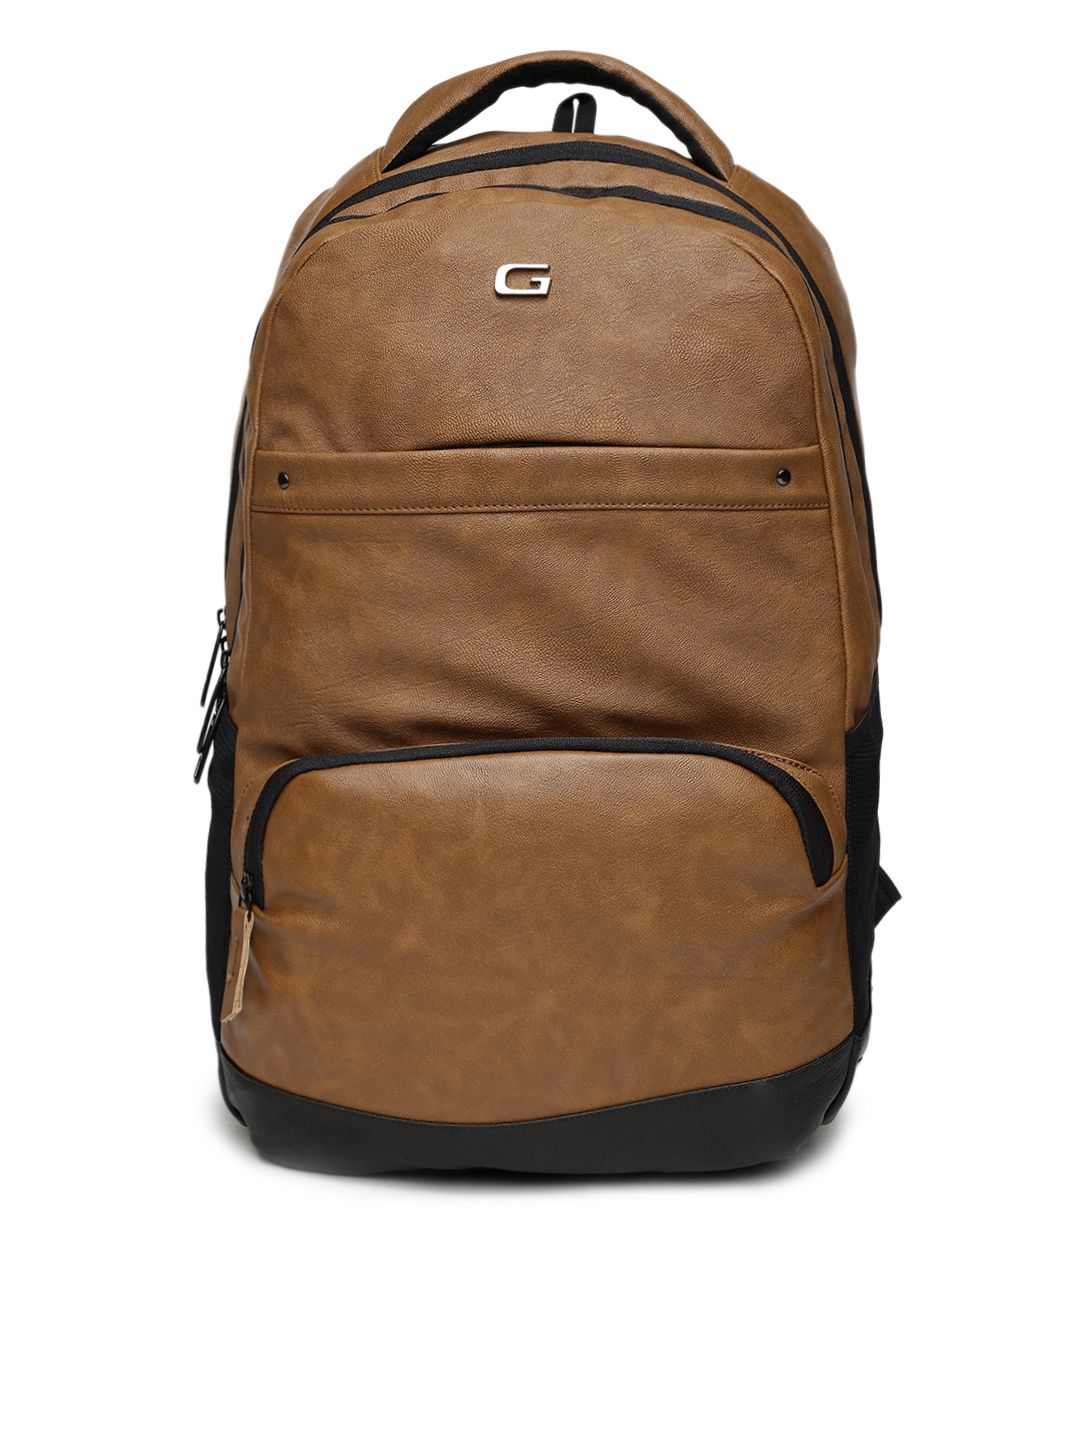 Gear Unisex Brown Faux Leather Solid Backpack Price in India